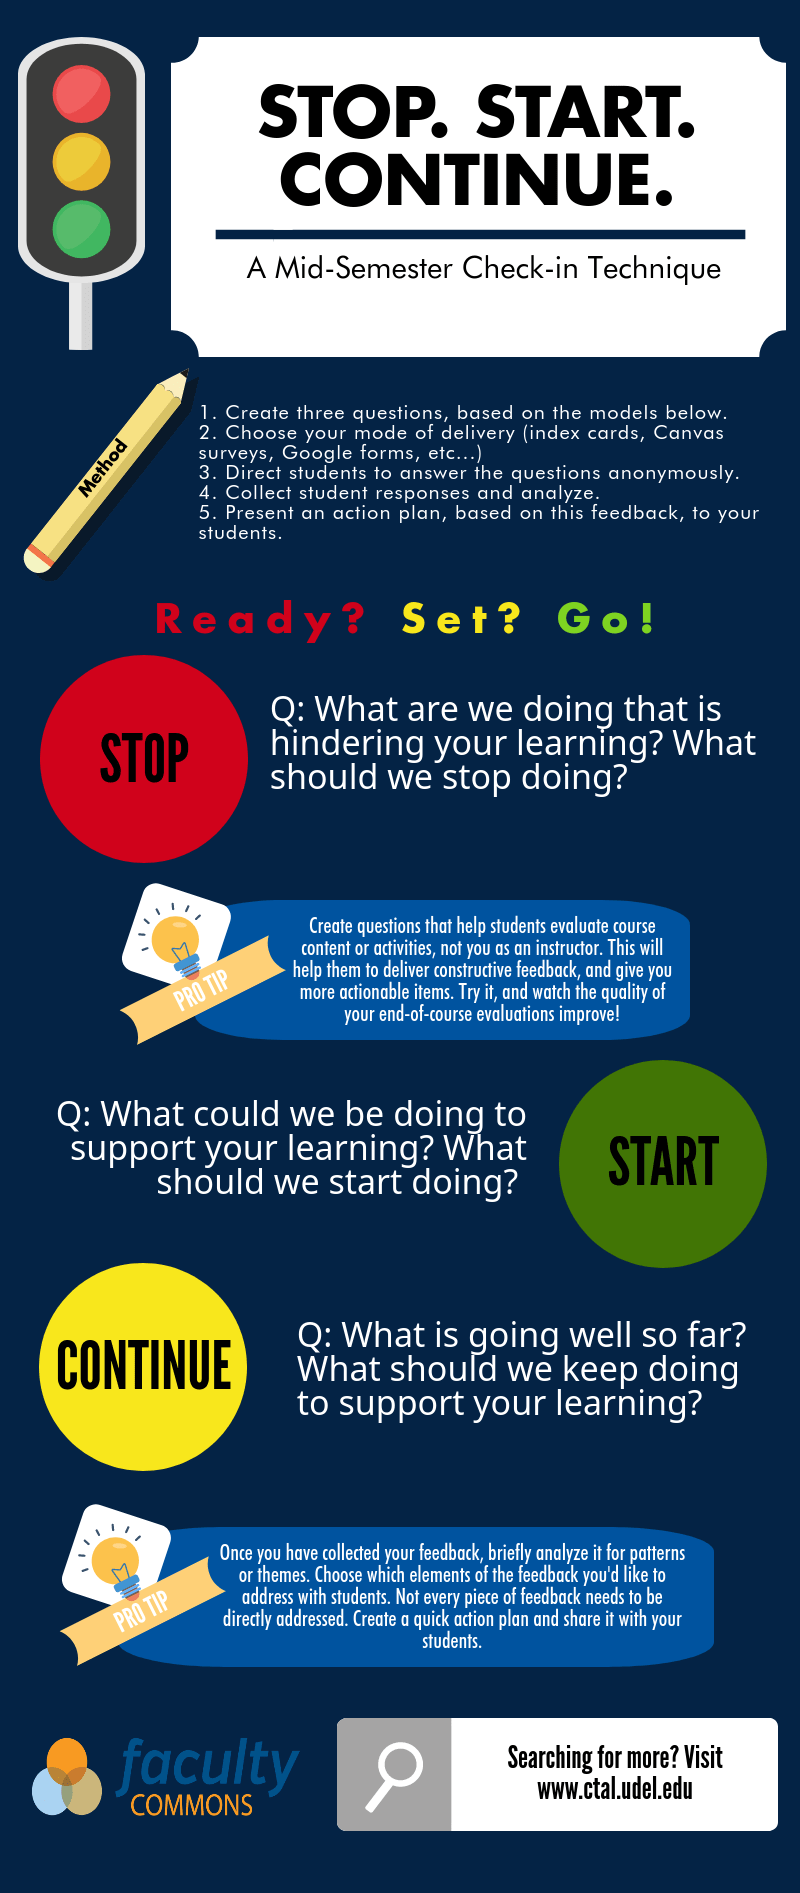 An infographic describing the steps to performing a mid-semester check-in technique: Stop. Start. Continue.